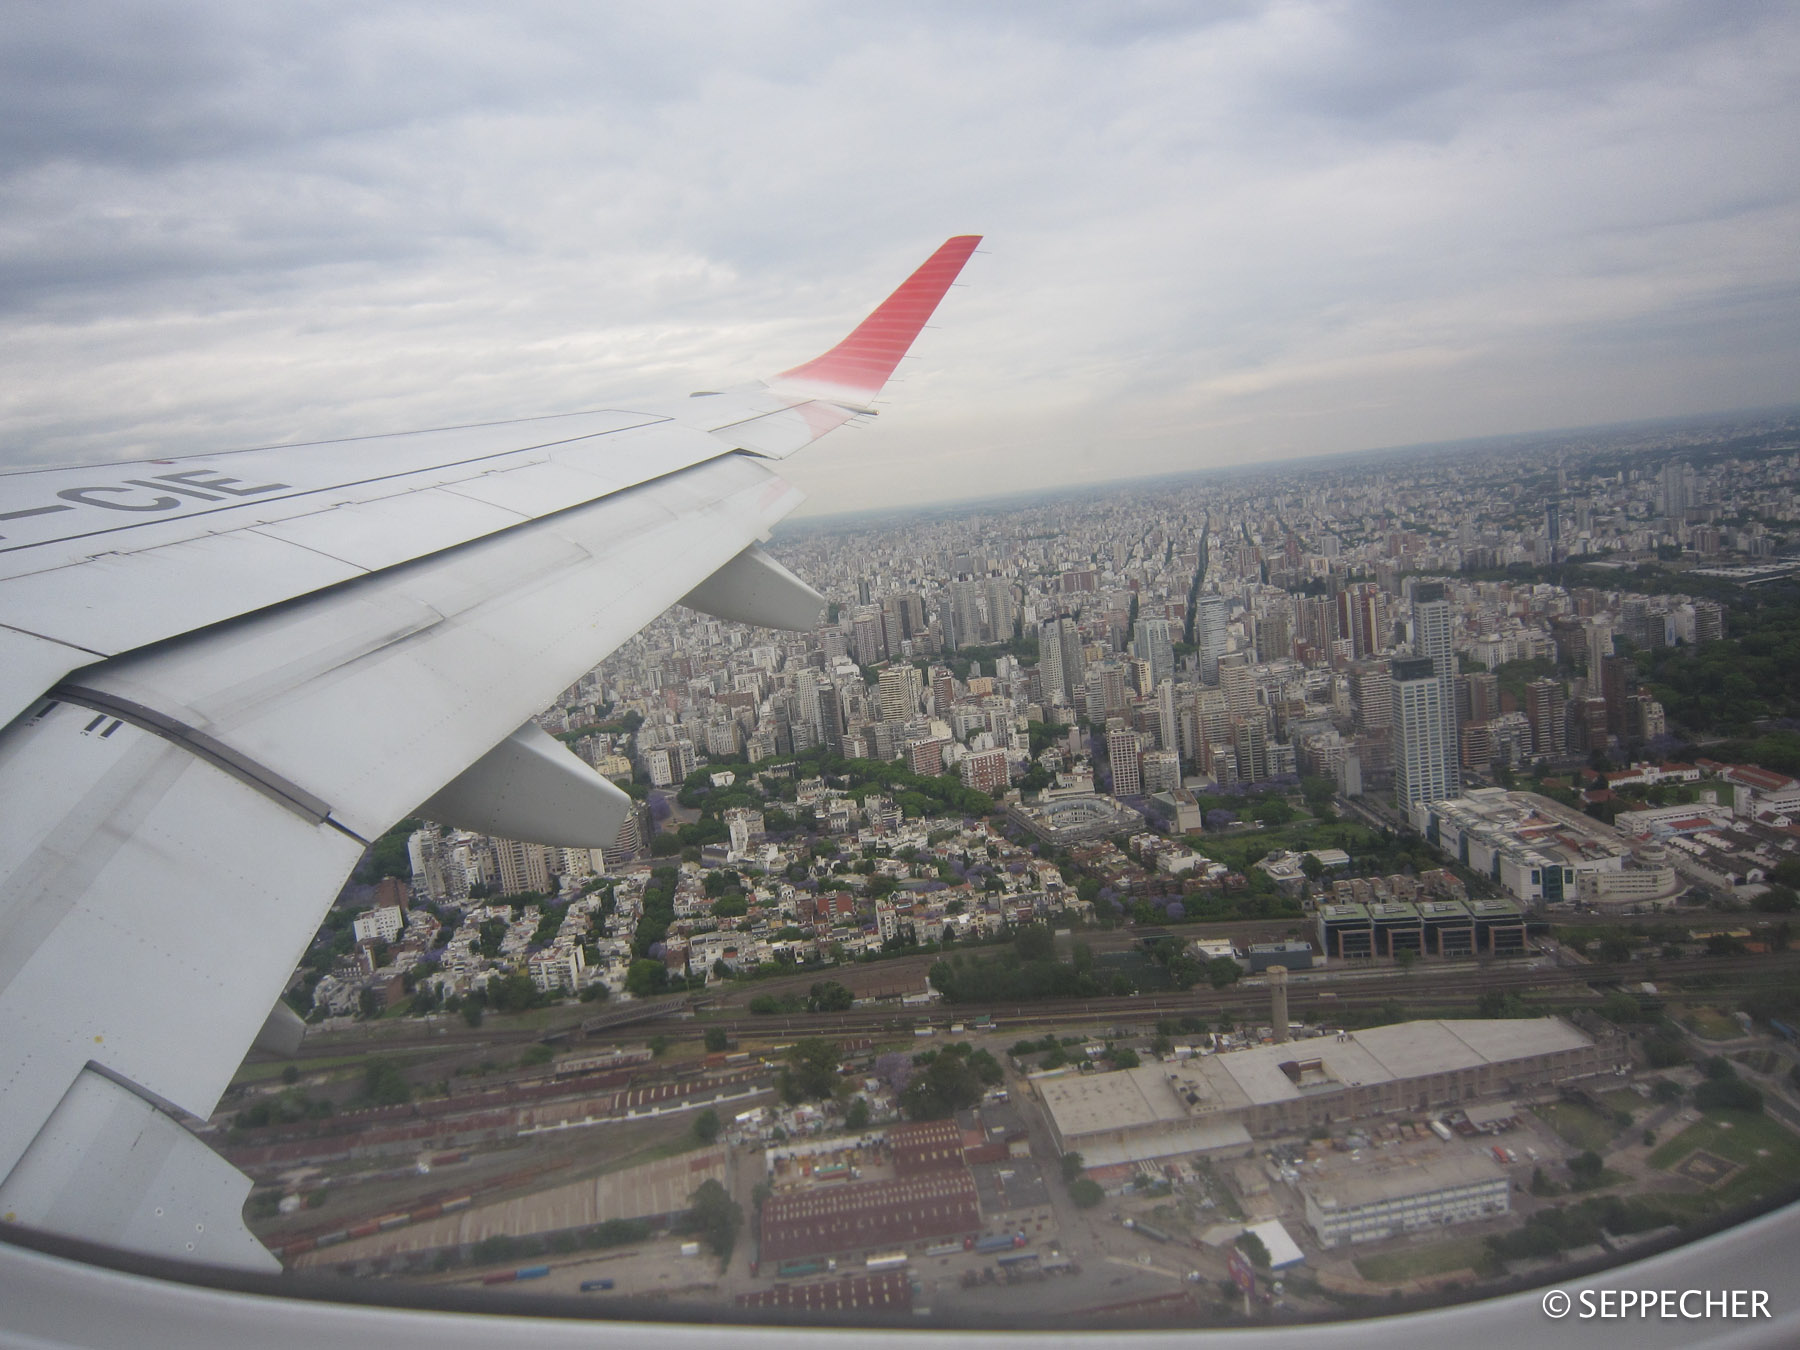 Buenos Aires from the air.